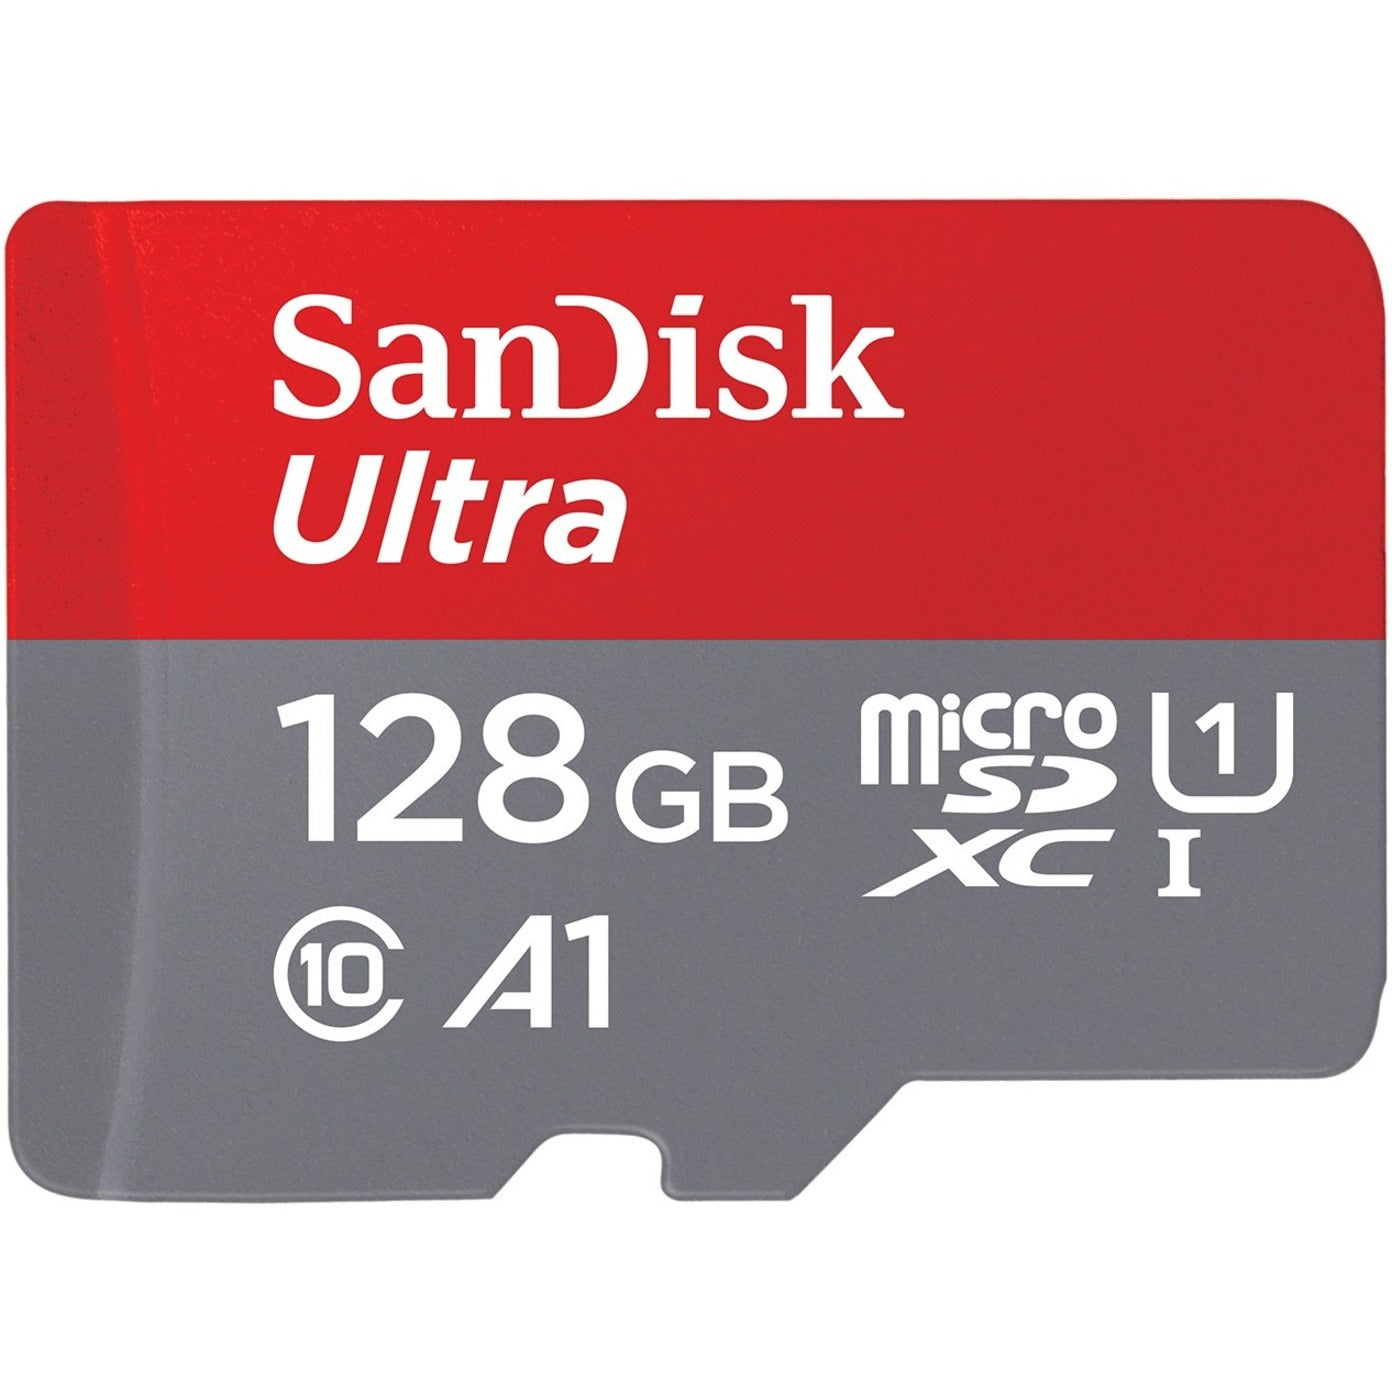 SanDisk SDSQUA4-128G-AN6MA Ultra microSDXC UHS-I Card with Adapter - 128GB, 10 Year Warranty, 120 MB/s Data Transfer Rate [Discontinued]